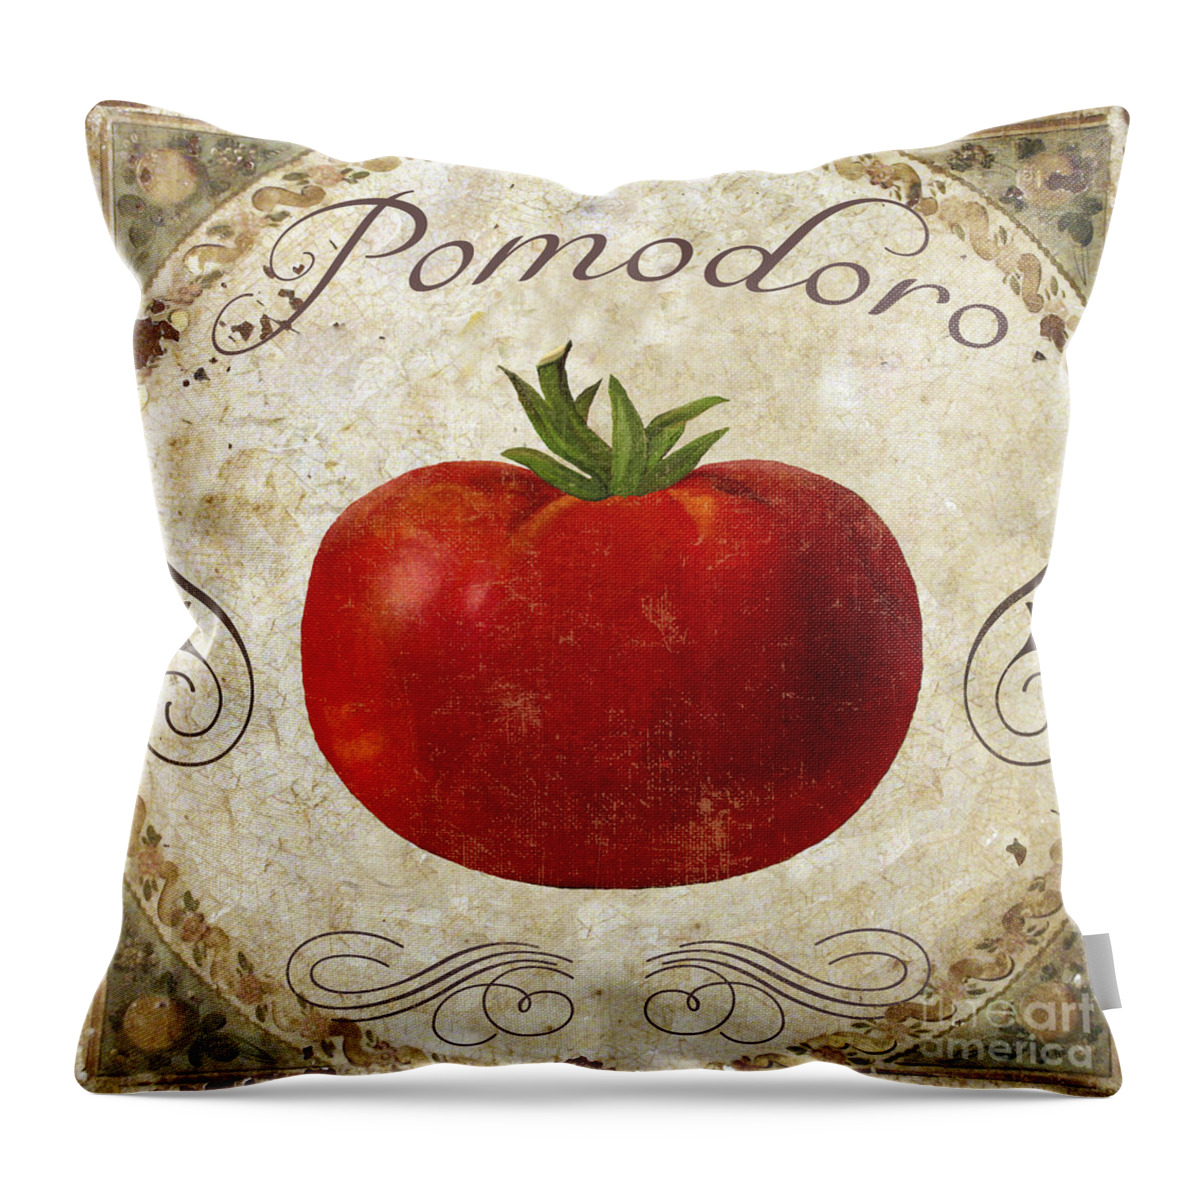 Tomato Throw Pillow featuring the painting Pomodoro Tomato Italian Kitchen by Mindy Sommers